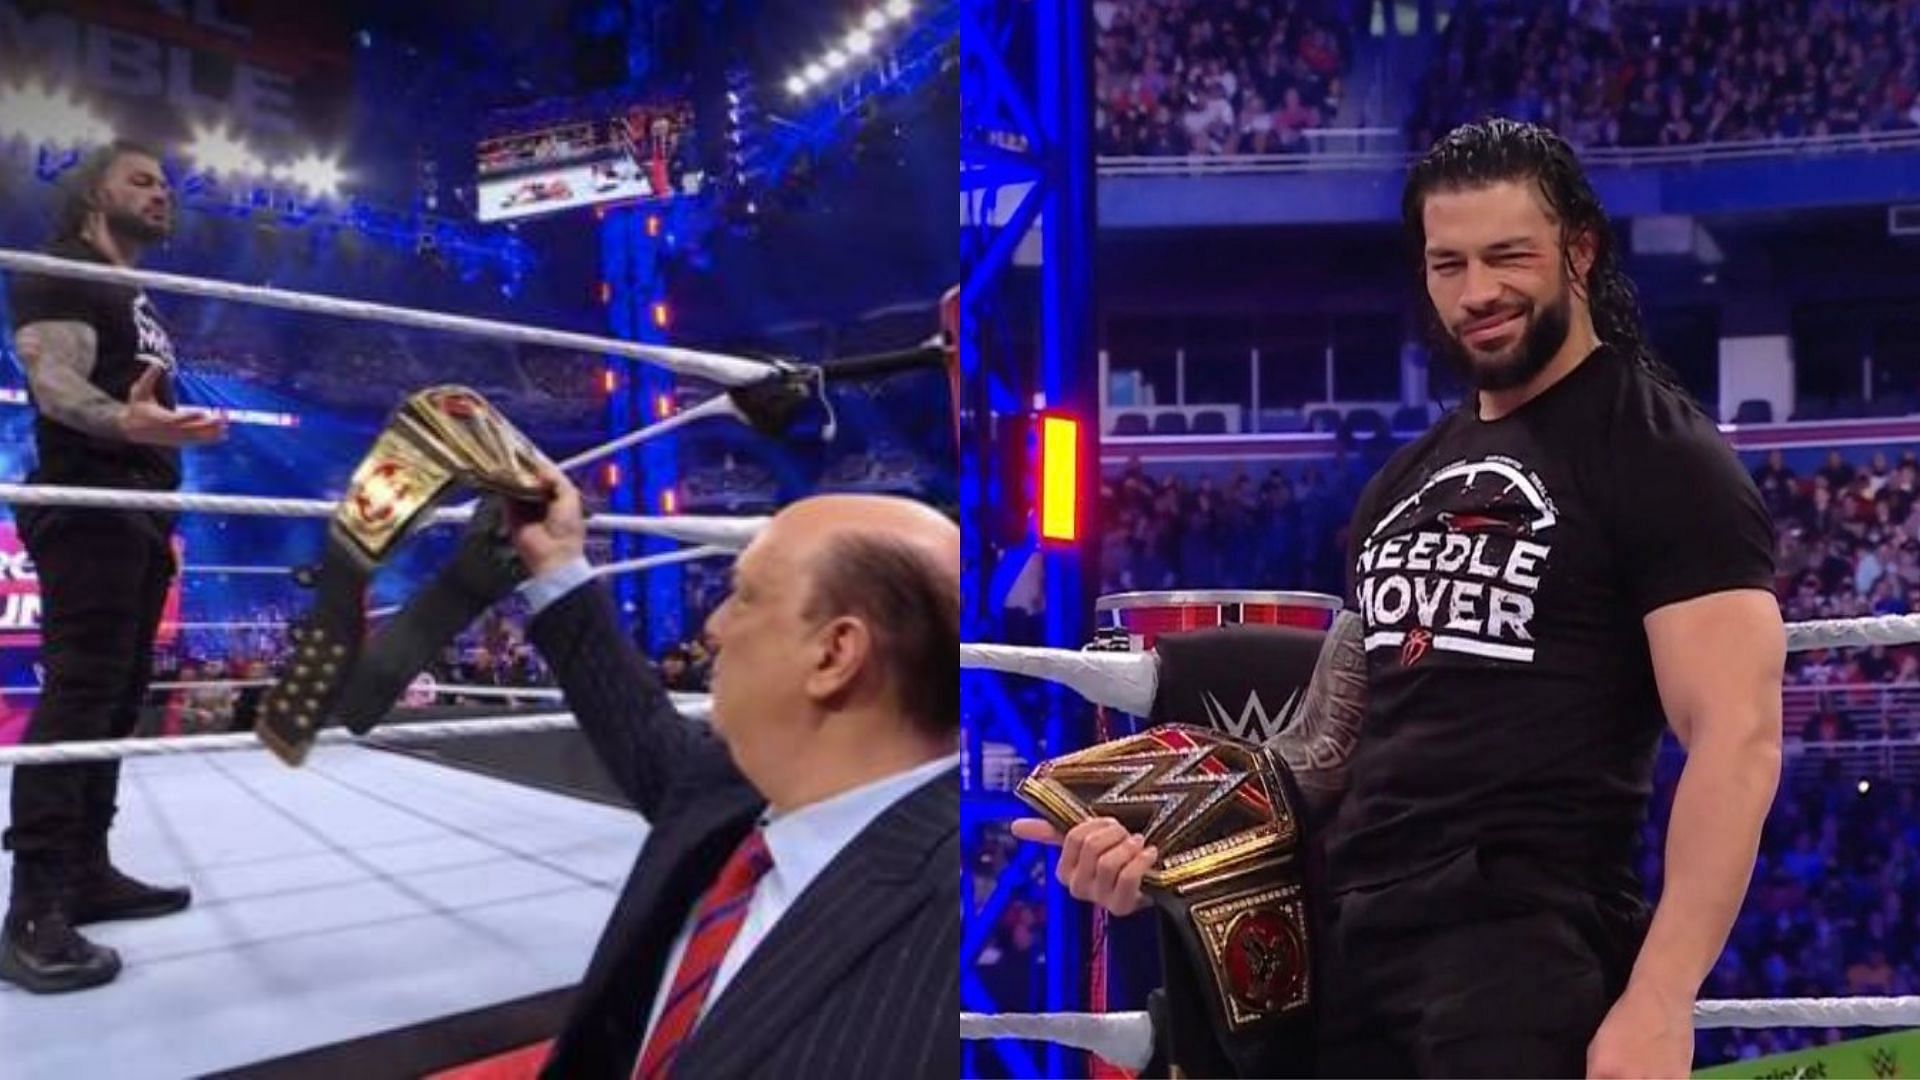 Roman Reigns reunited with Paul Heyman at the Royal Rumble